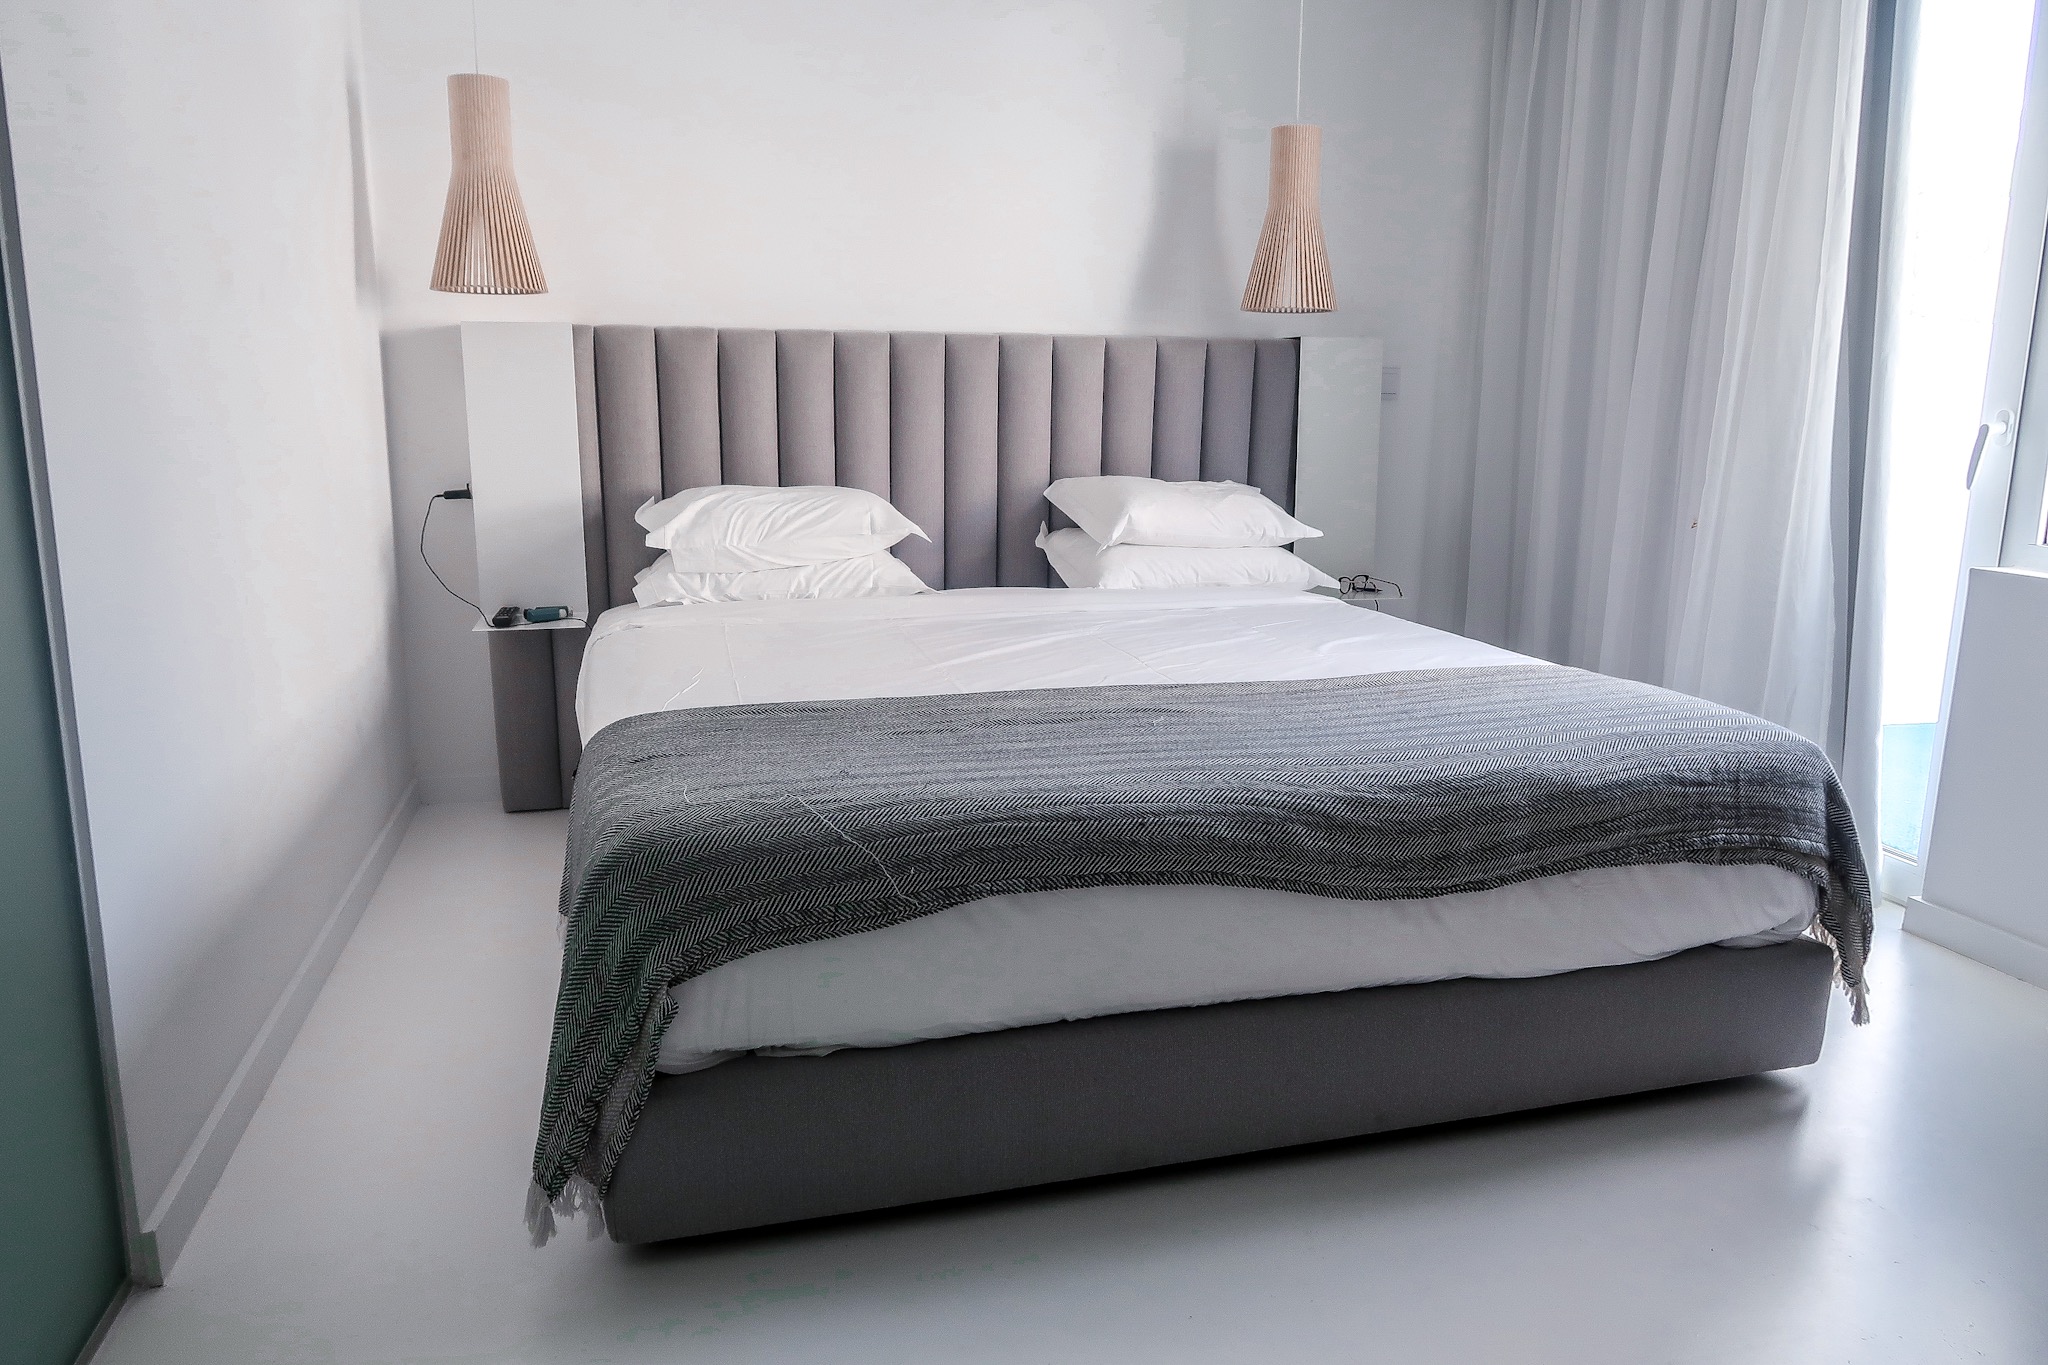 Large bed in room - Hotel California in Albuferia Old Town, The Algarve Portugal | eco-friendly, vegan, adults-only hotel with a modern twist | On The Beach Holidays Review | Elle Blonde Luxury Lifestyle Destination Travel Blog